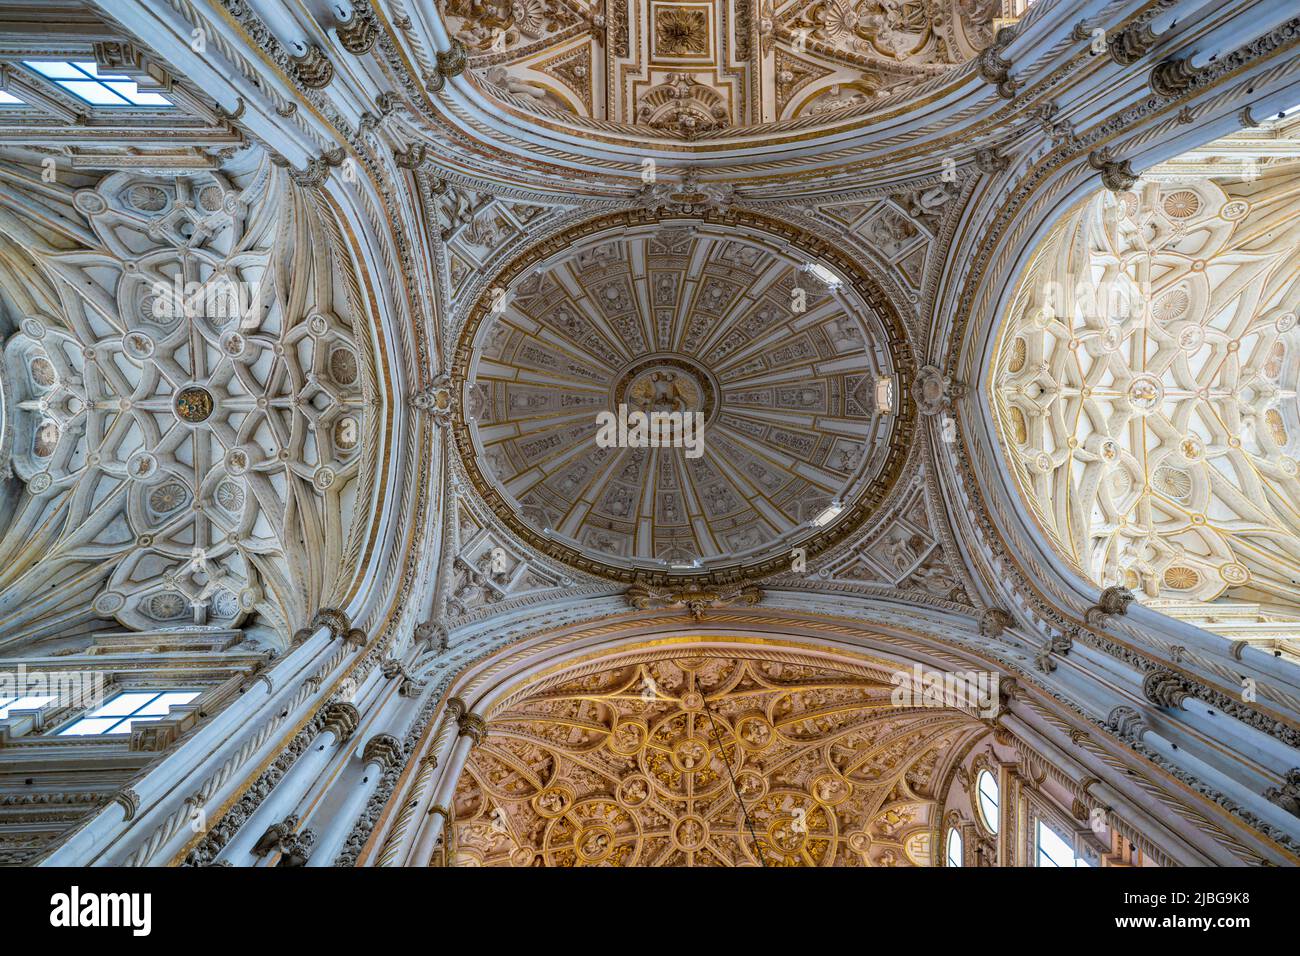 Mosque–Cathedral of Córdoba Spain Stock Photo